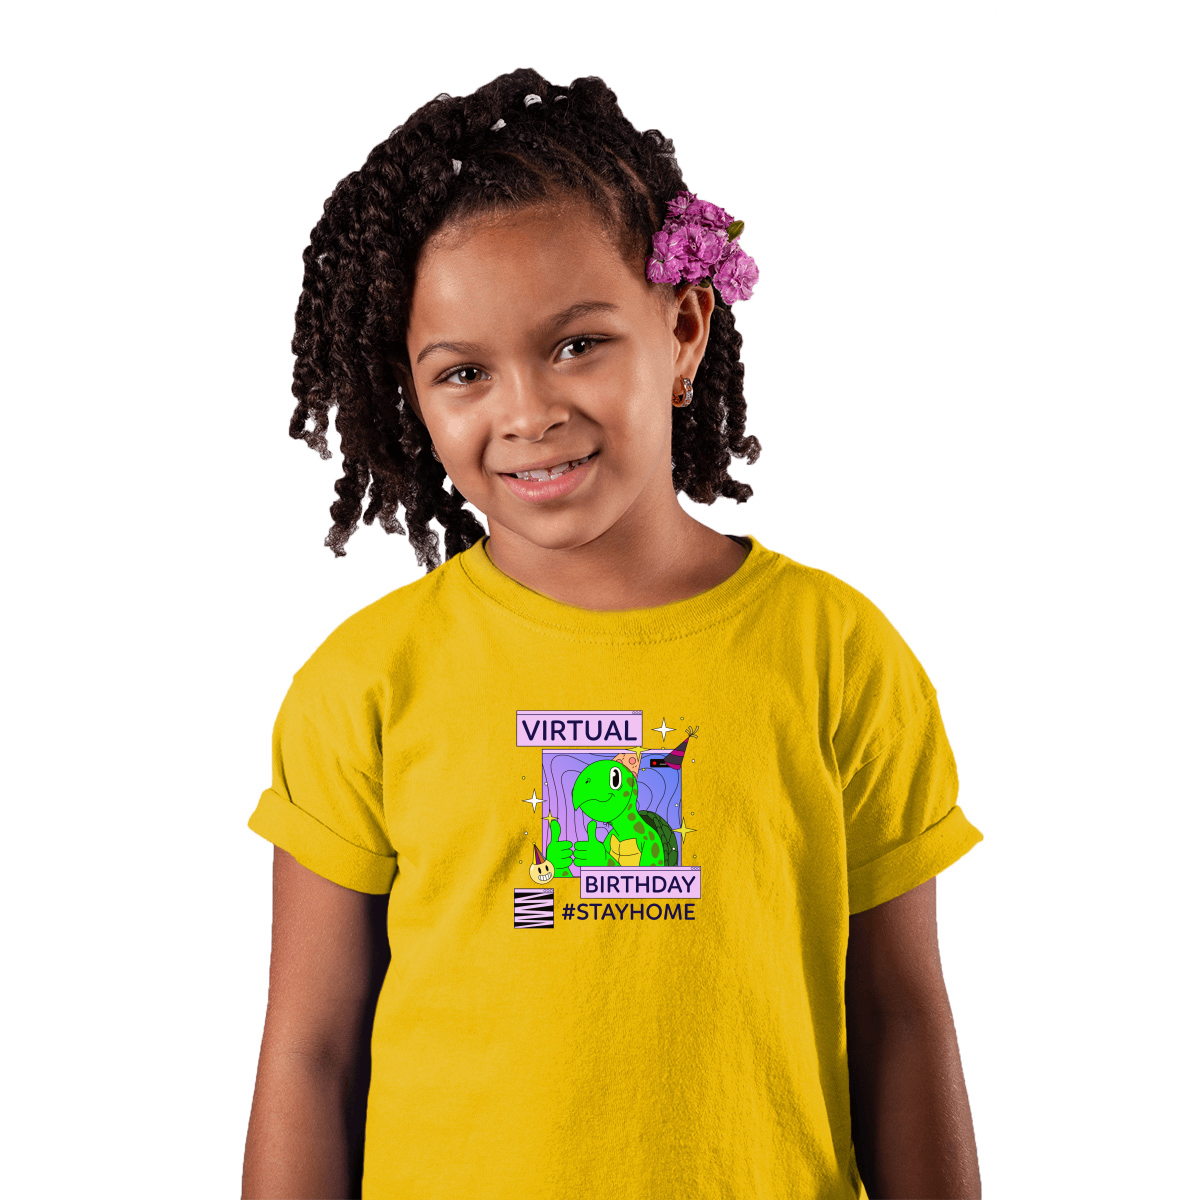 Virtual Party Stay Home Toddler T-shirt | Yellow